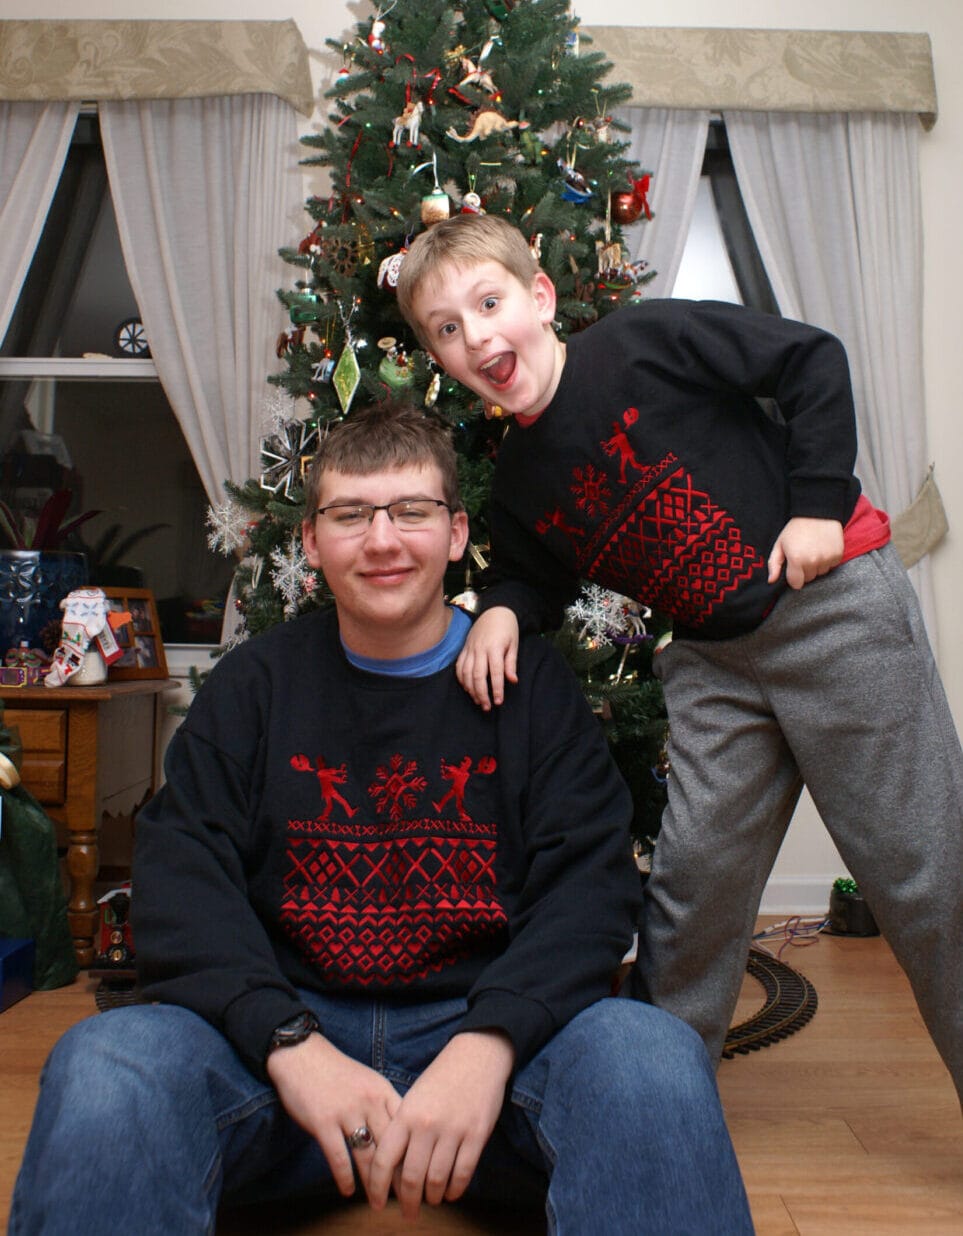 brothers in matching christmas zombie sweaters by a Christmas tree